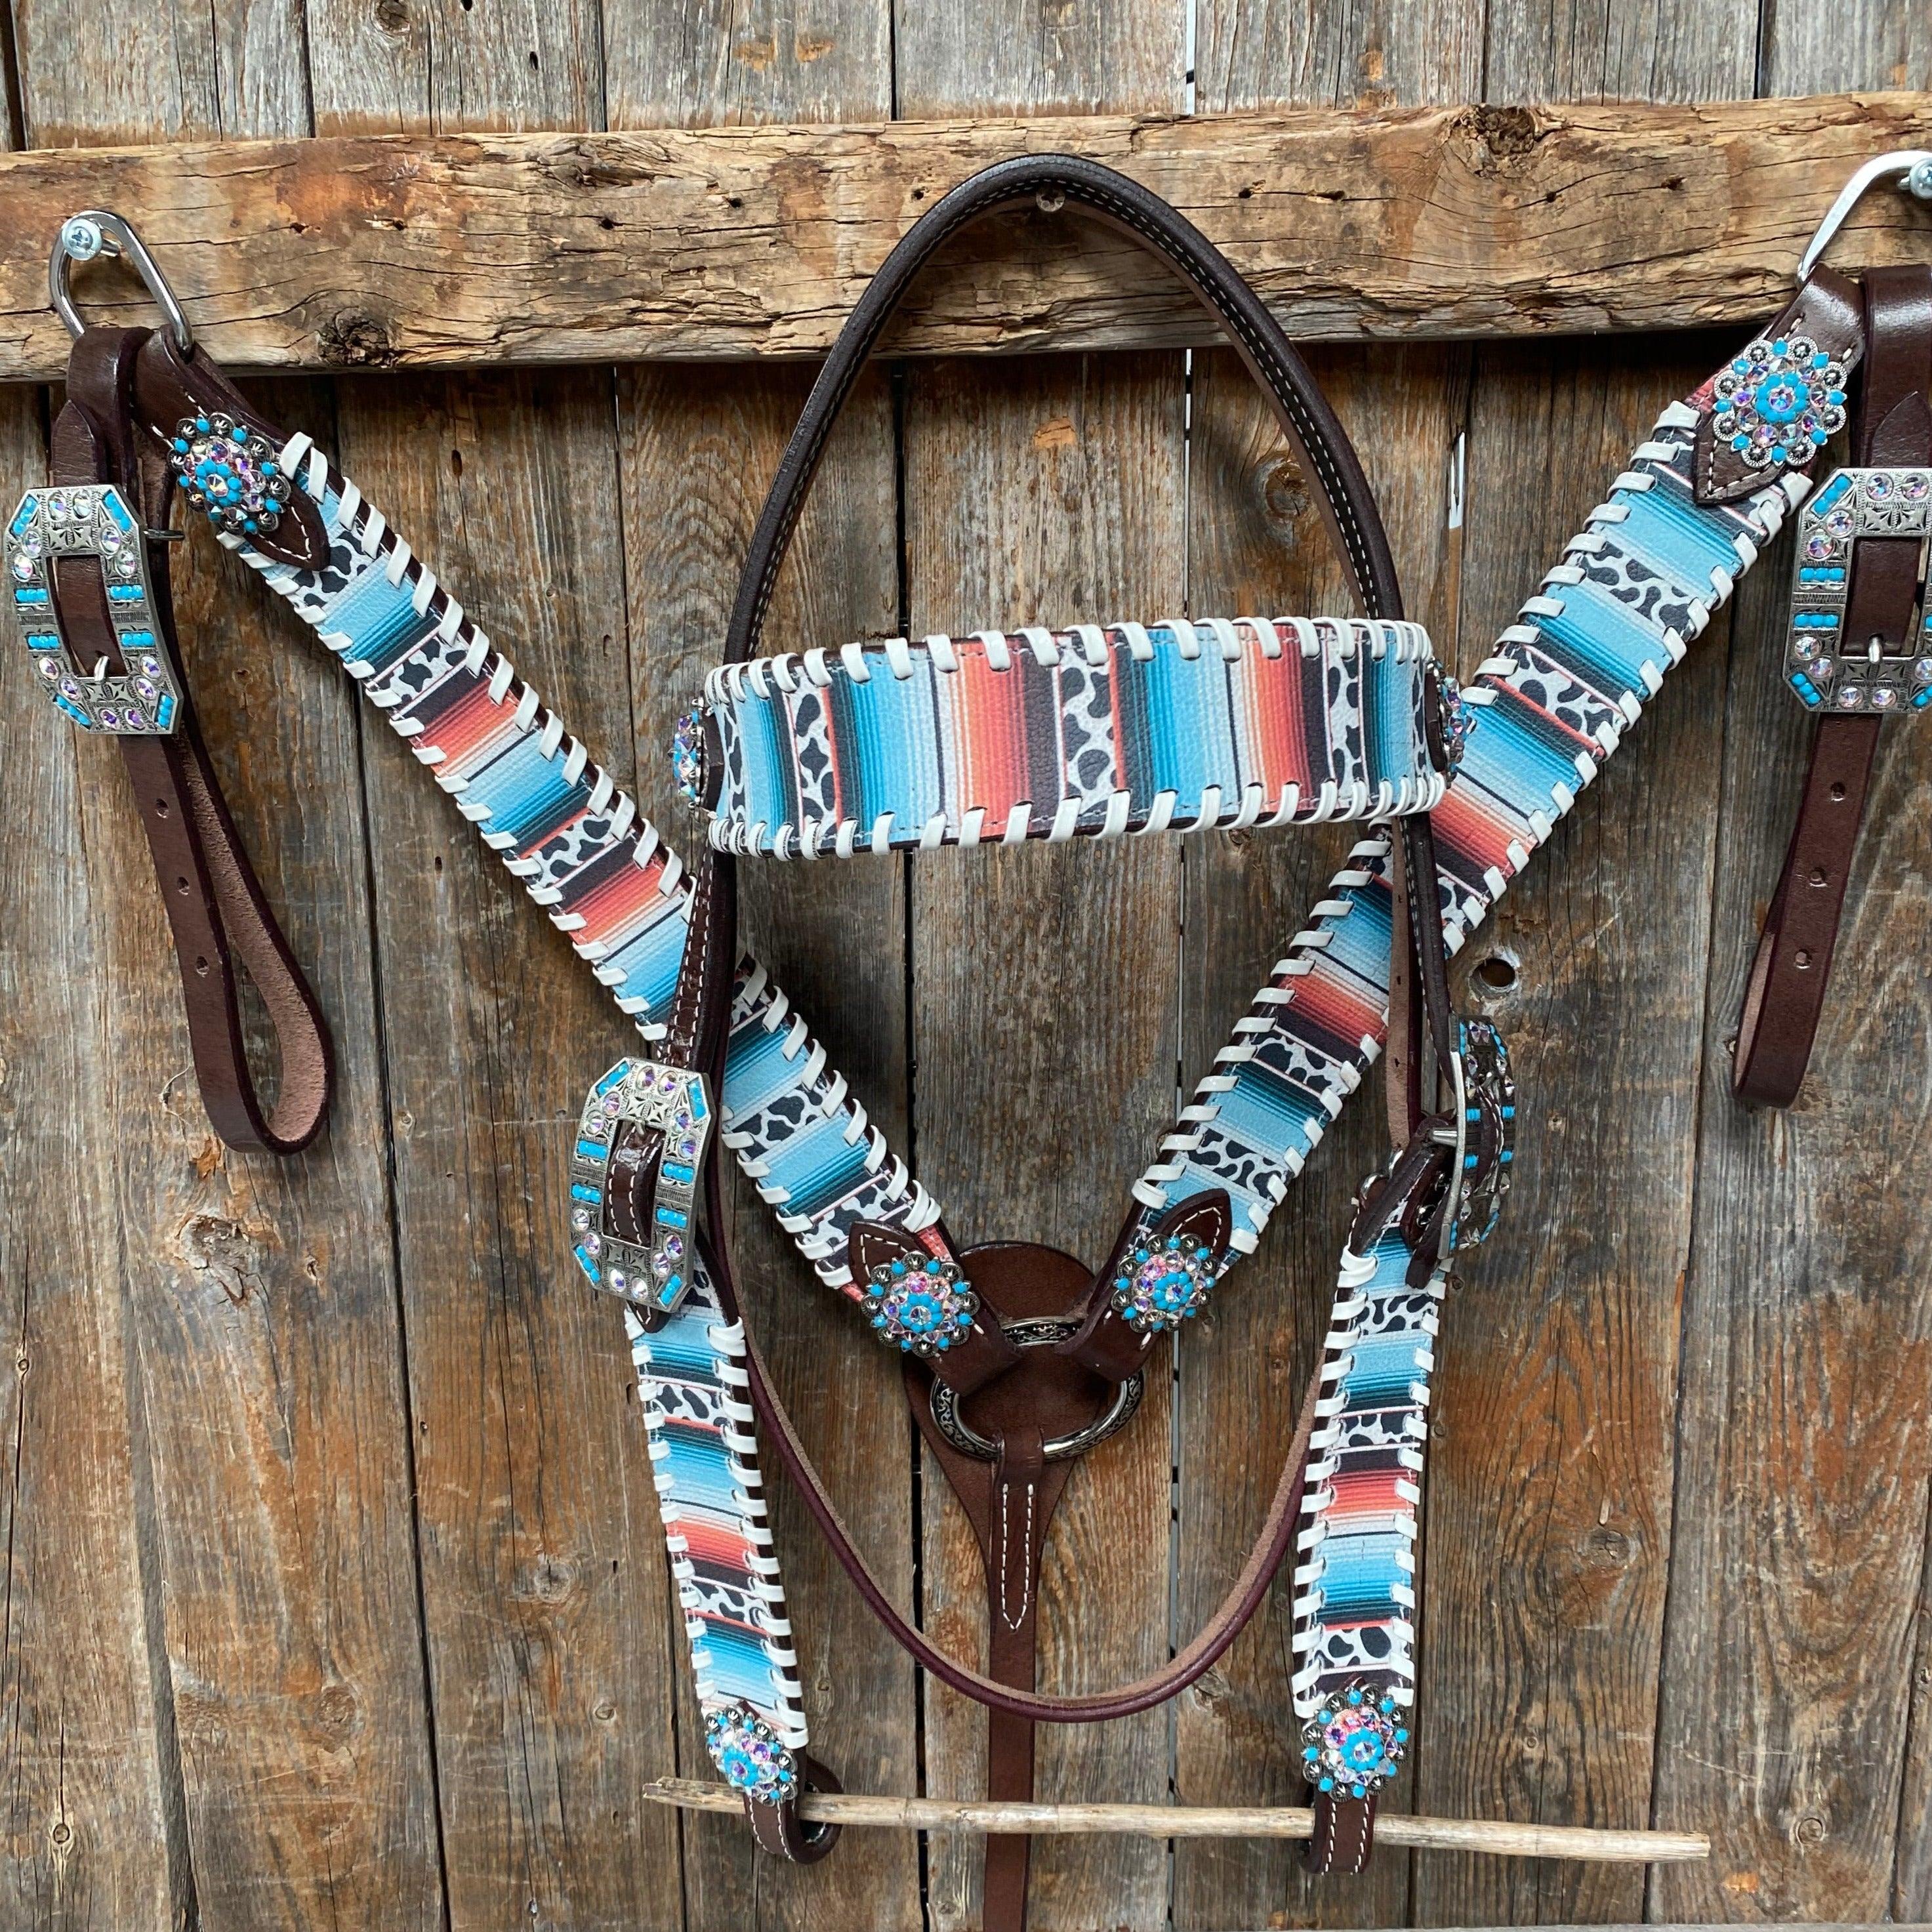 Cow Stripe Print Turquoise Headstall & Breastcollar #BBBC500 - RODEO DRIVE